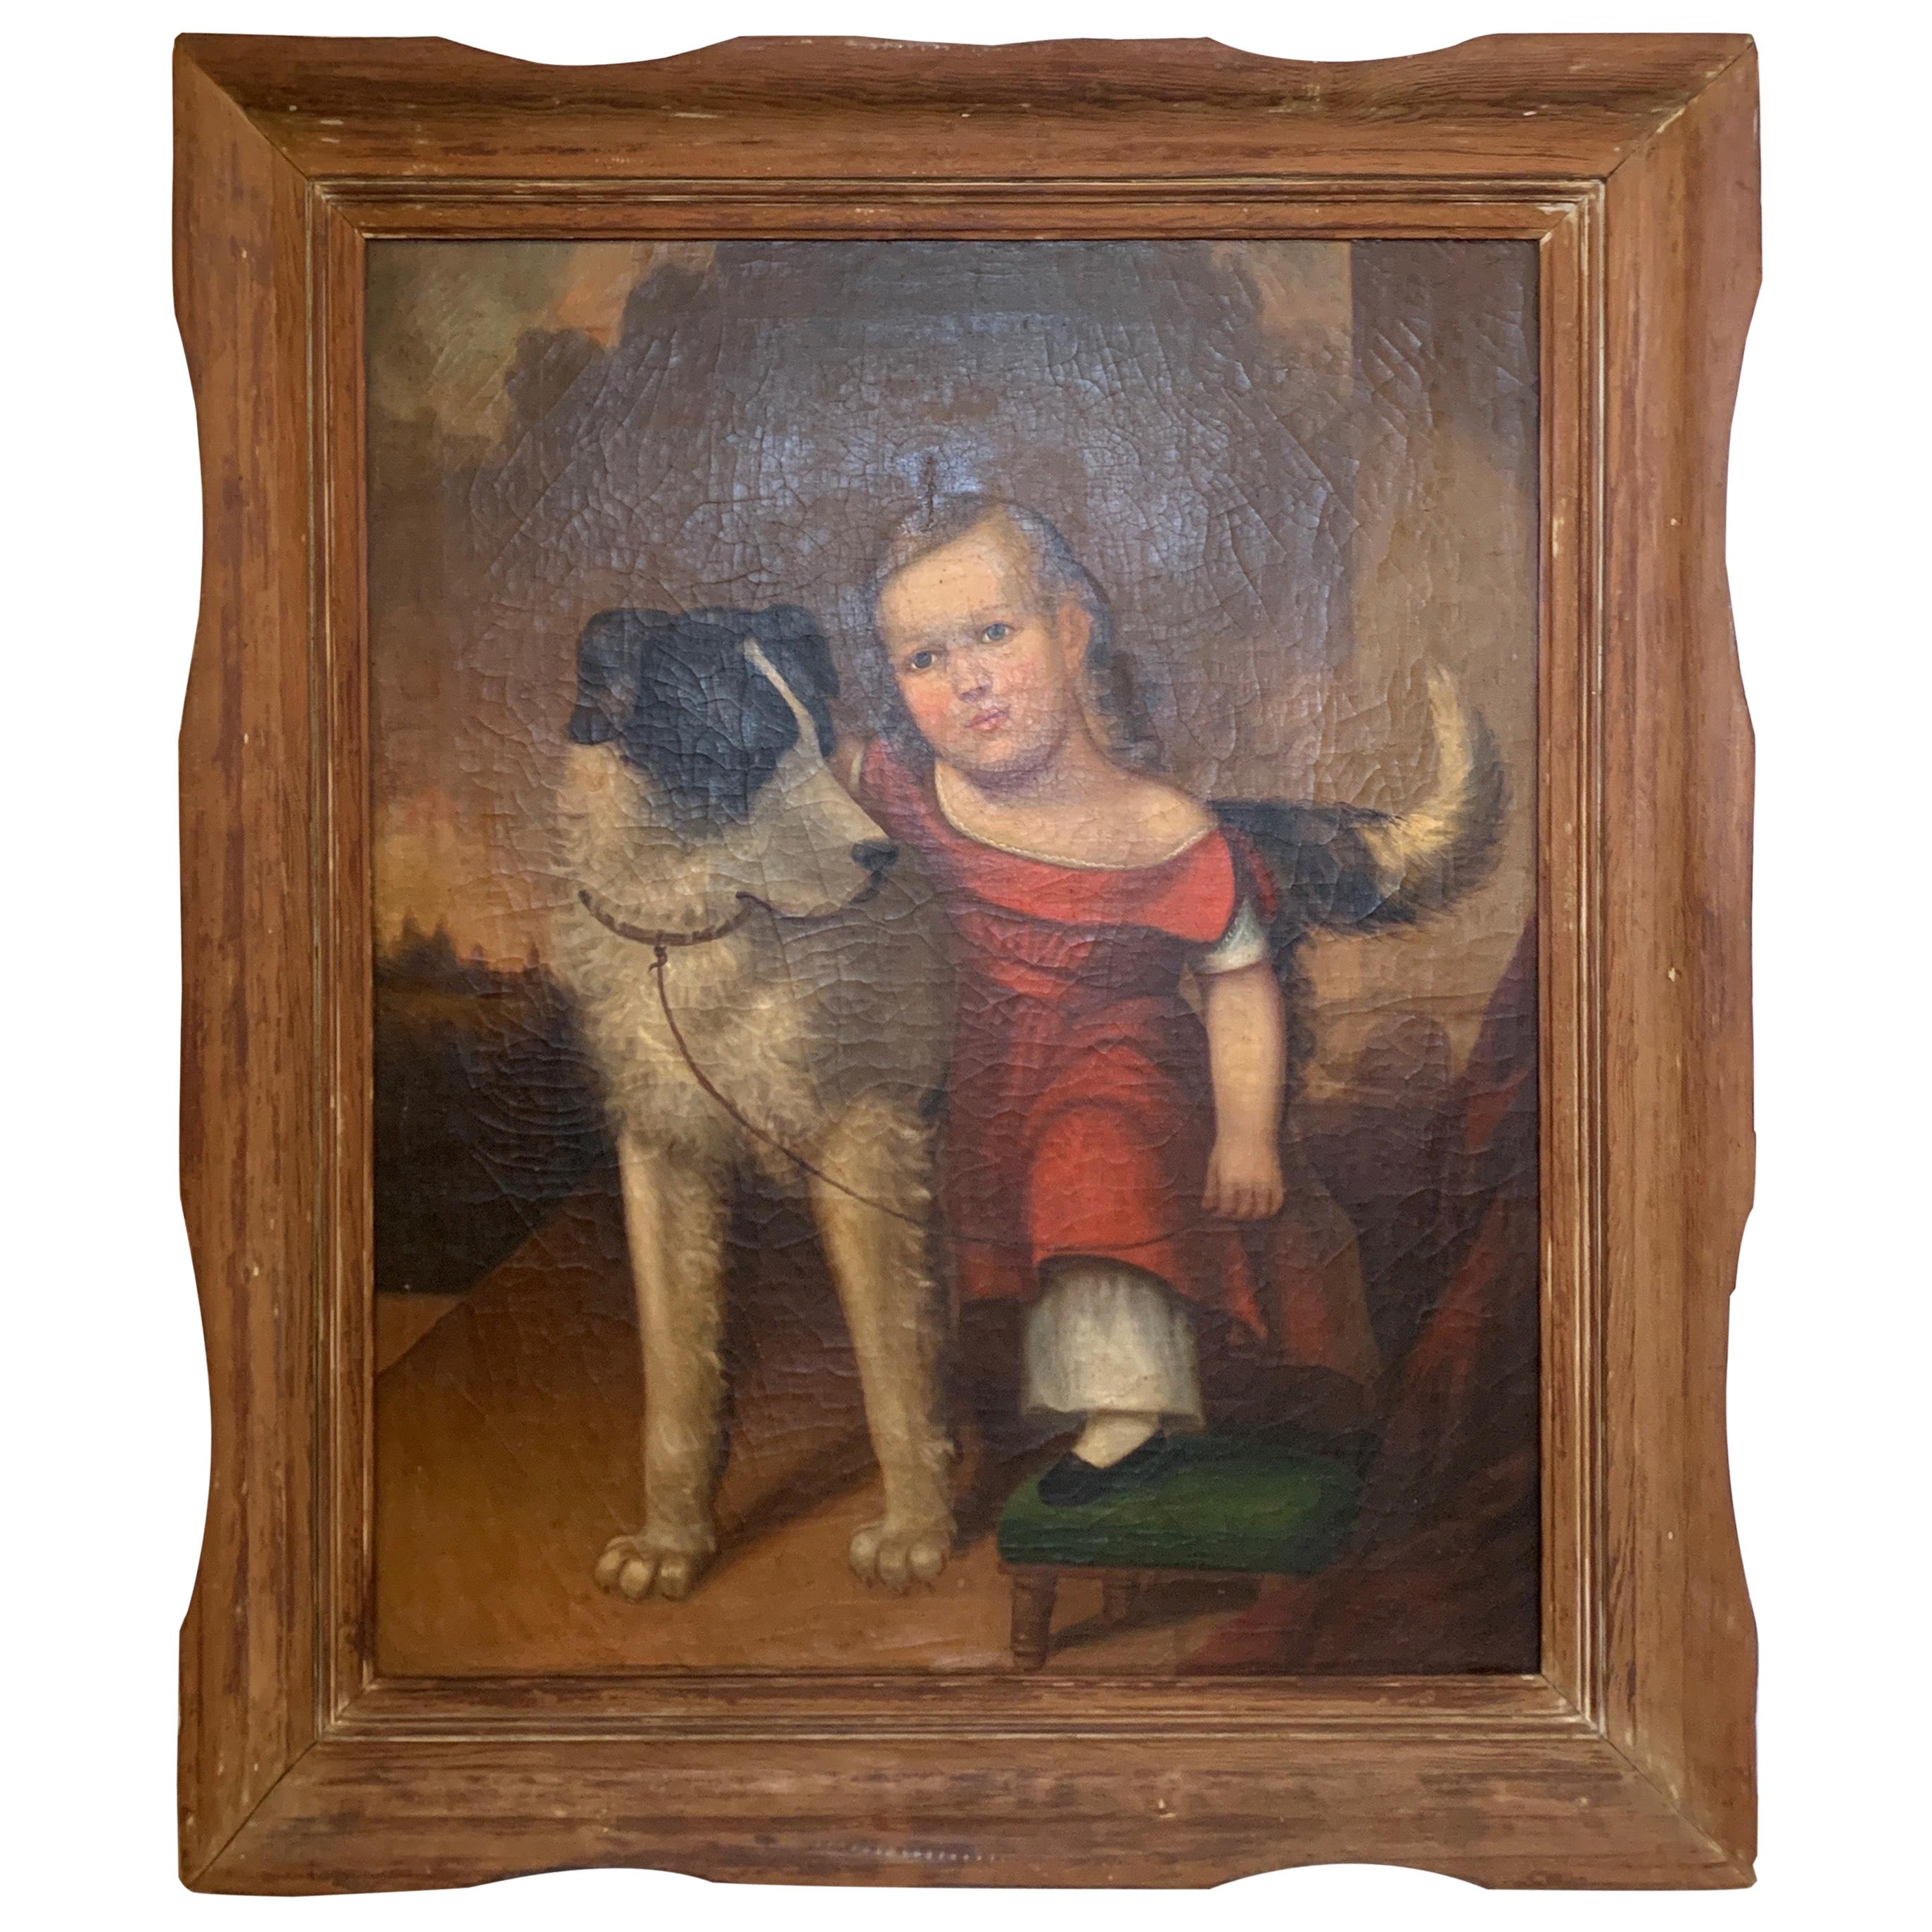 Early 19th Century Oil on Canvas of Child with Dog